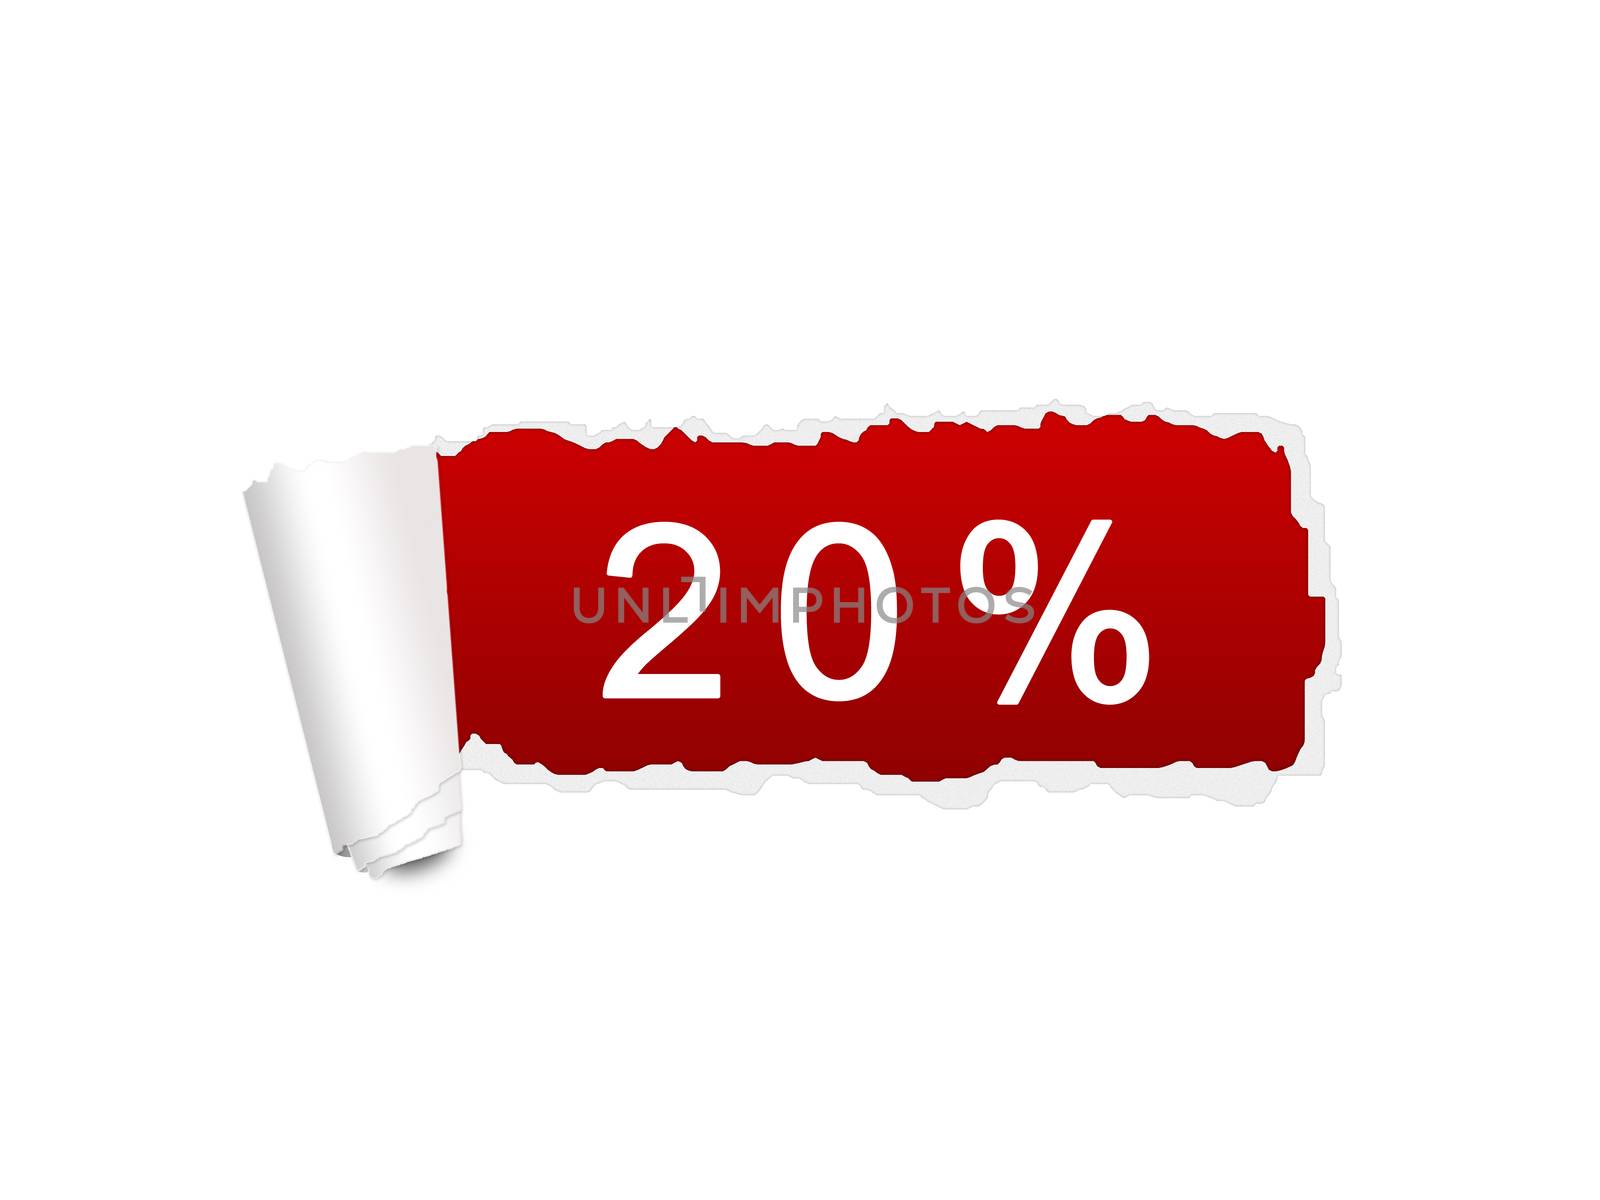 20 percent discount on the ripped paper by Dddaca